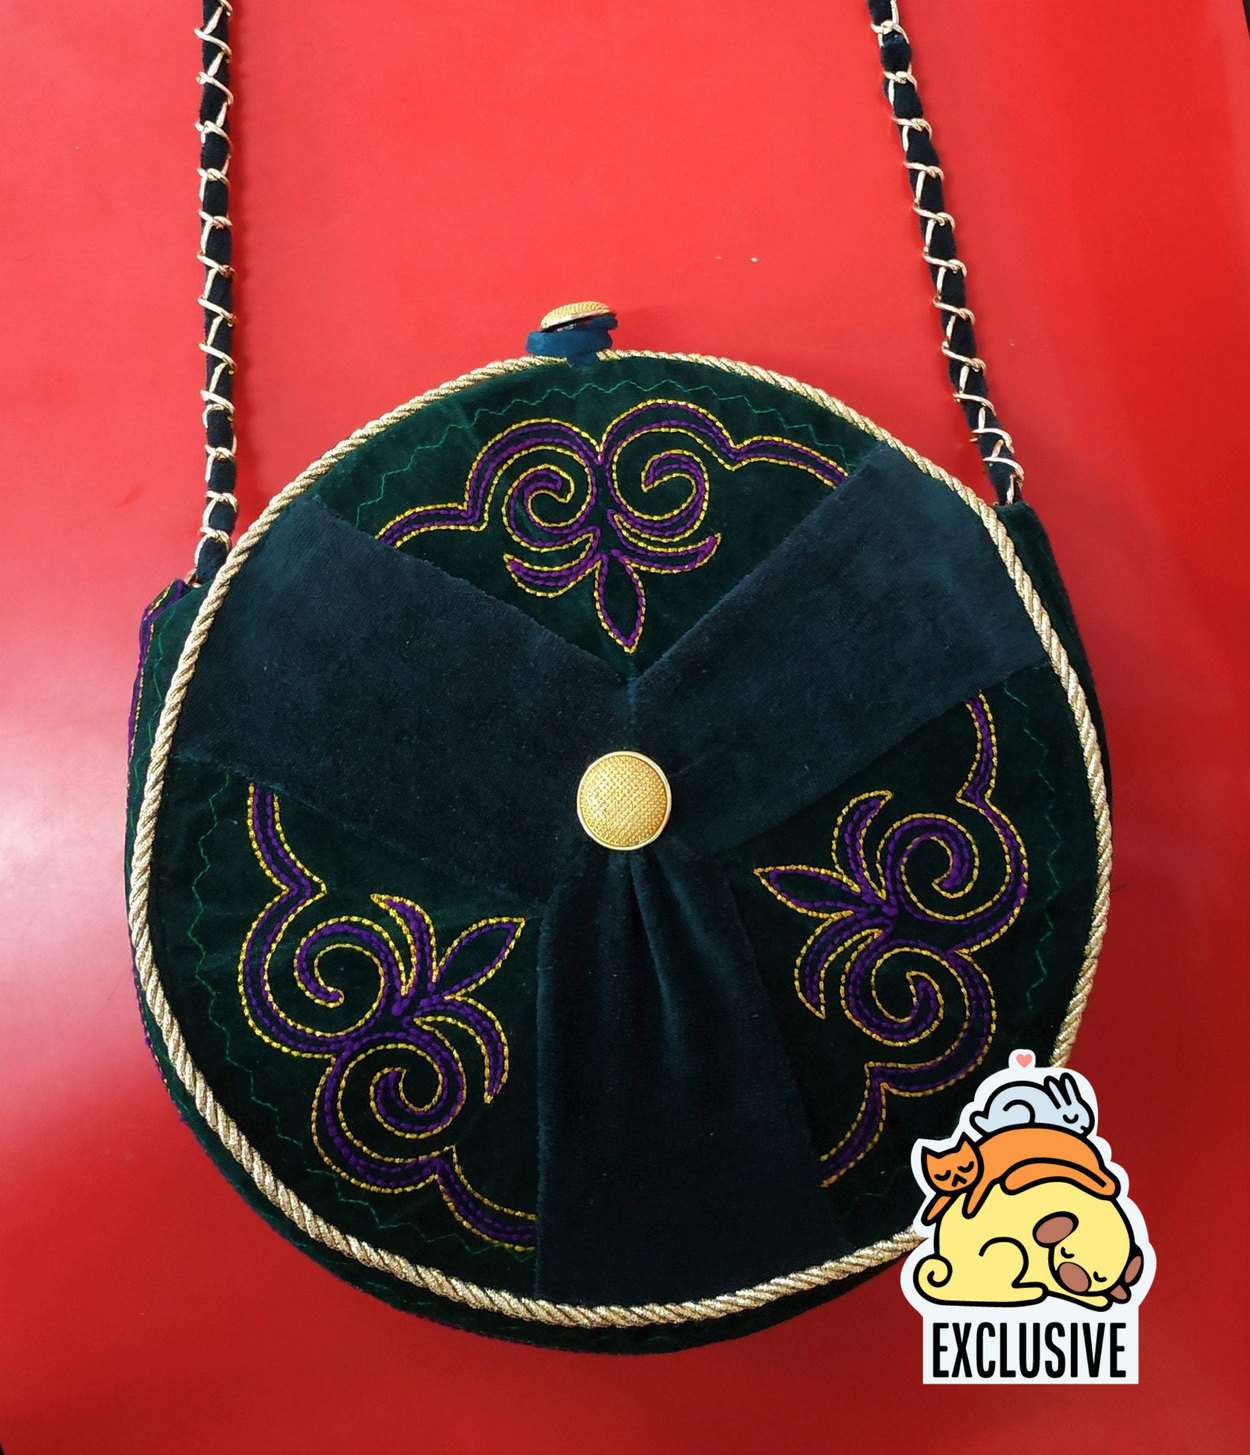 Exclusive dark green round ethno style bag with a long handle - GLEZANT designer goods store. 